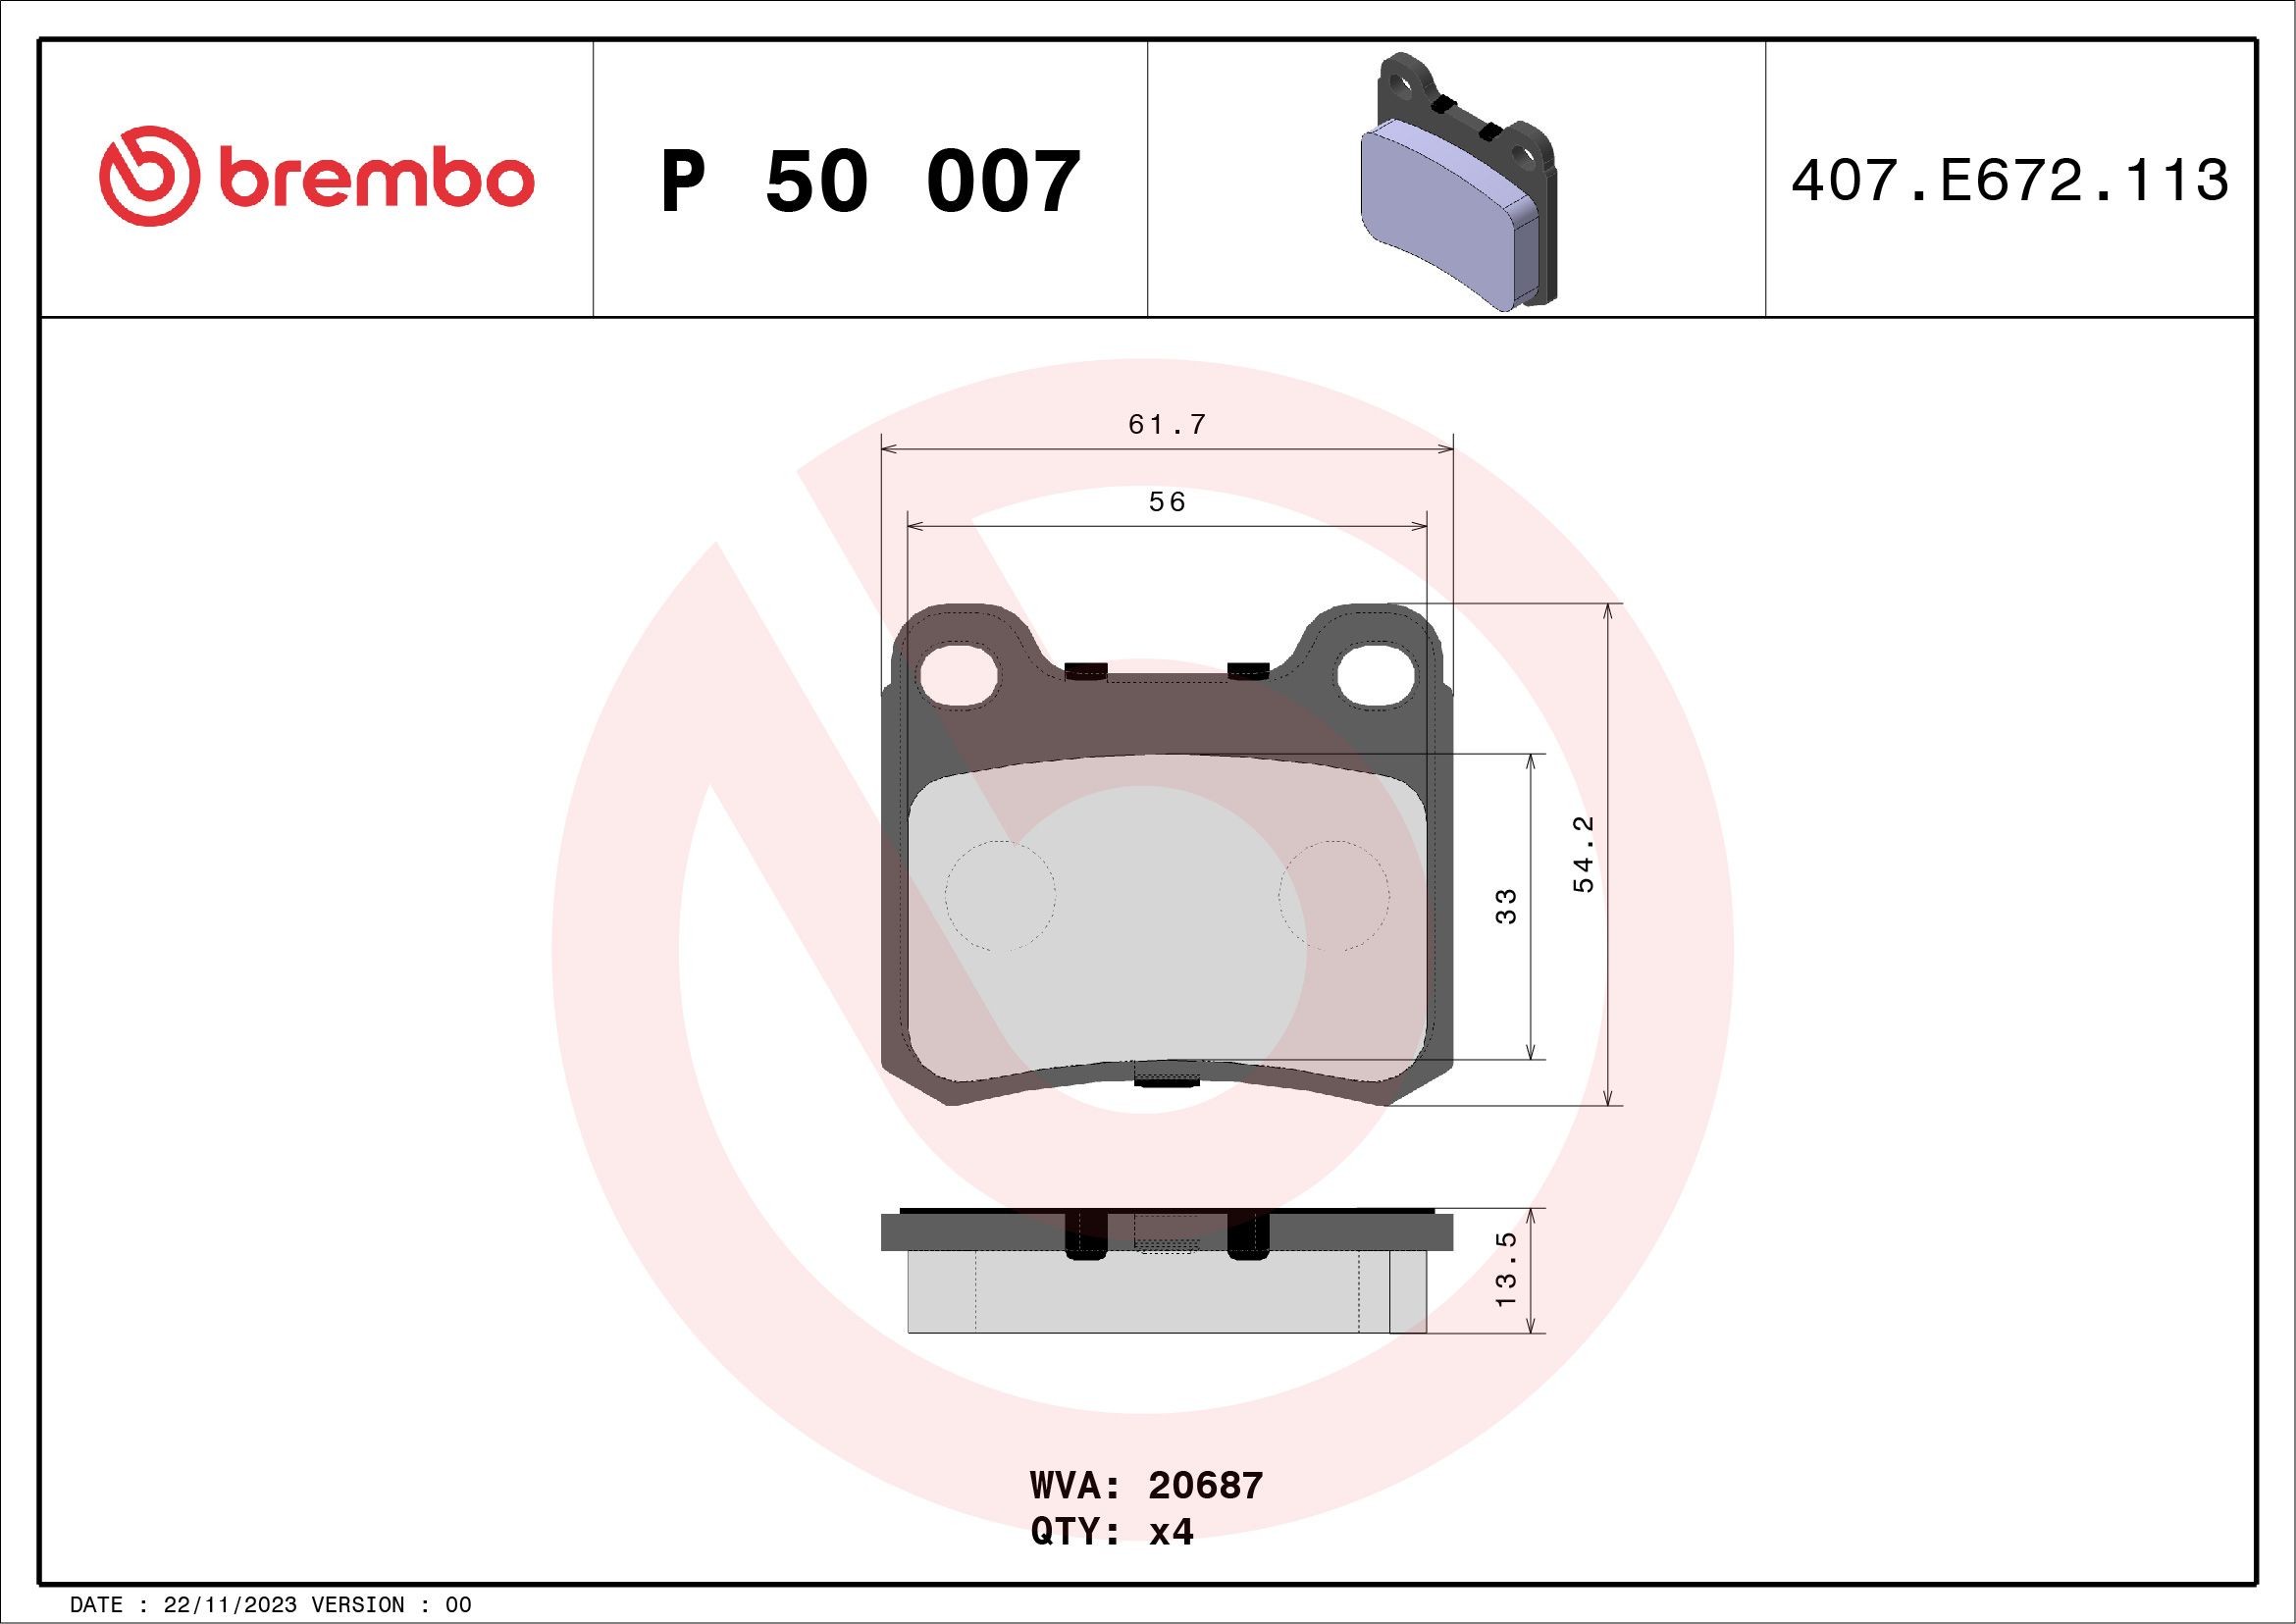 BREMBO P 50 007 Brake pad set excl. wear warning contact, without accessories